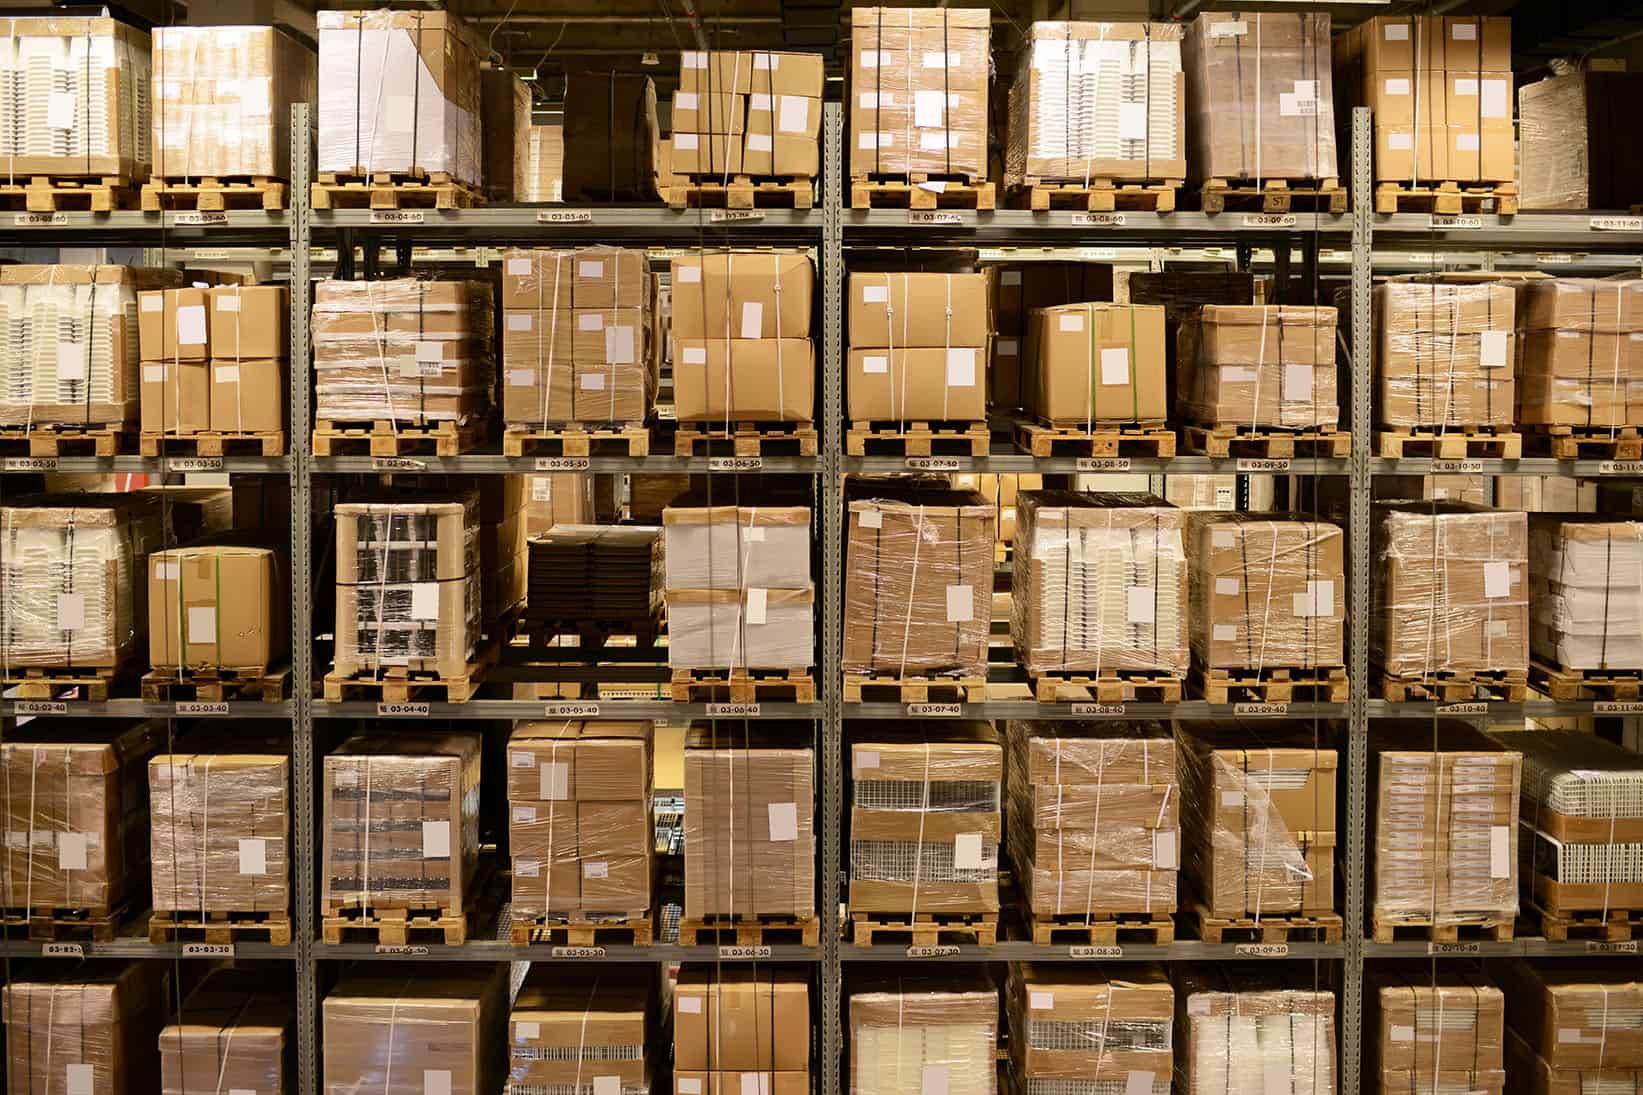 Warehouse with shelves that are filled with packages